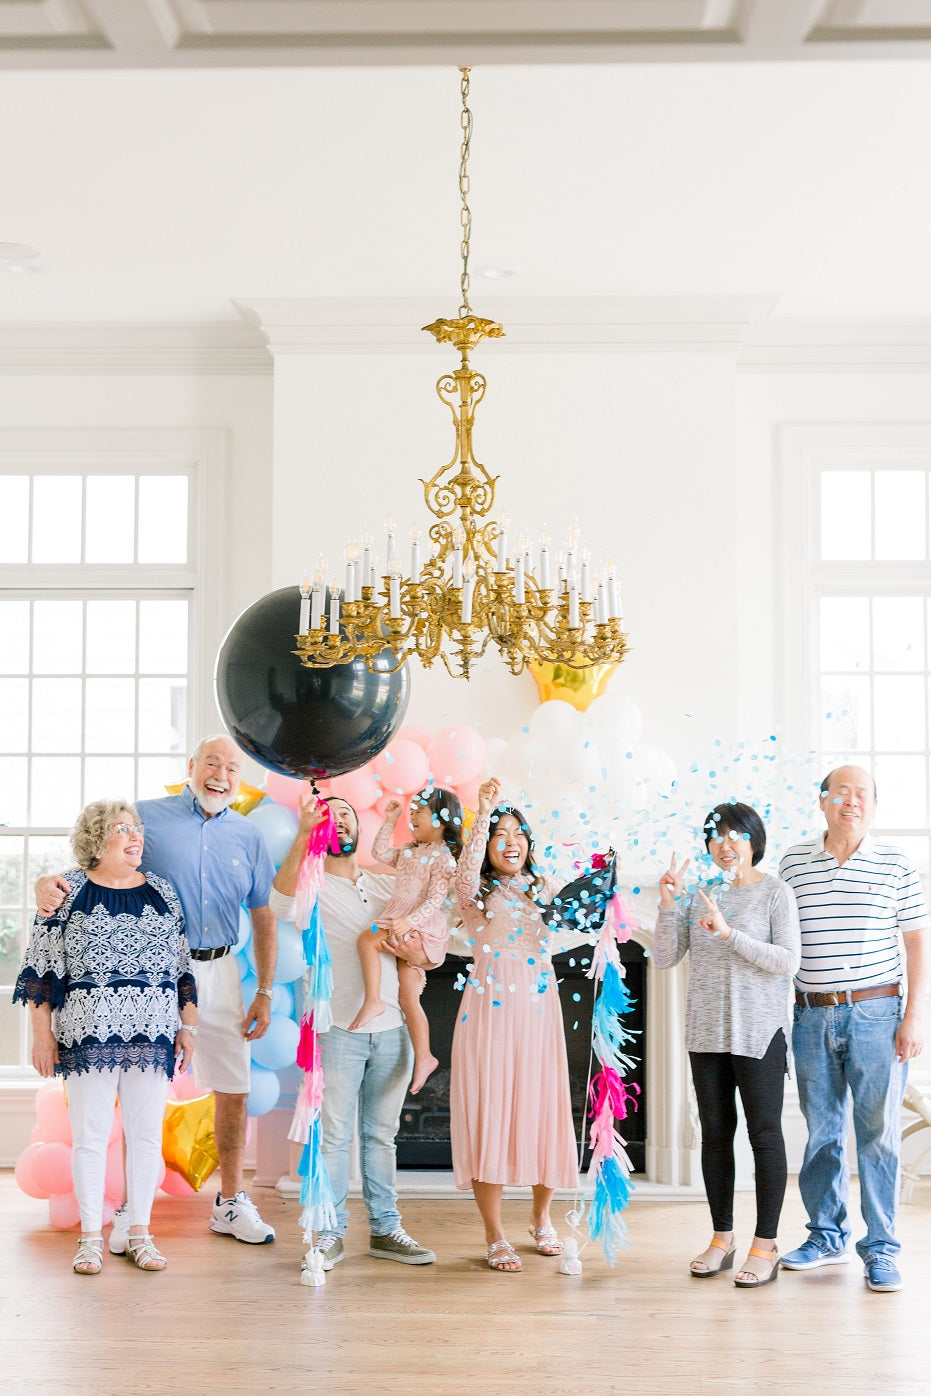 Family celebrating a gender reveal with a black giant balloon filled with either blue or pink confetti.